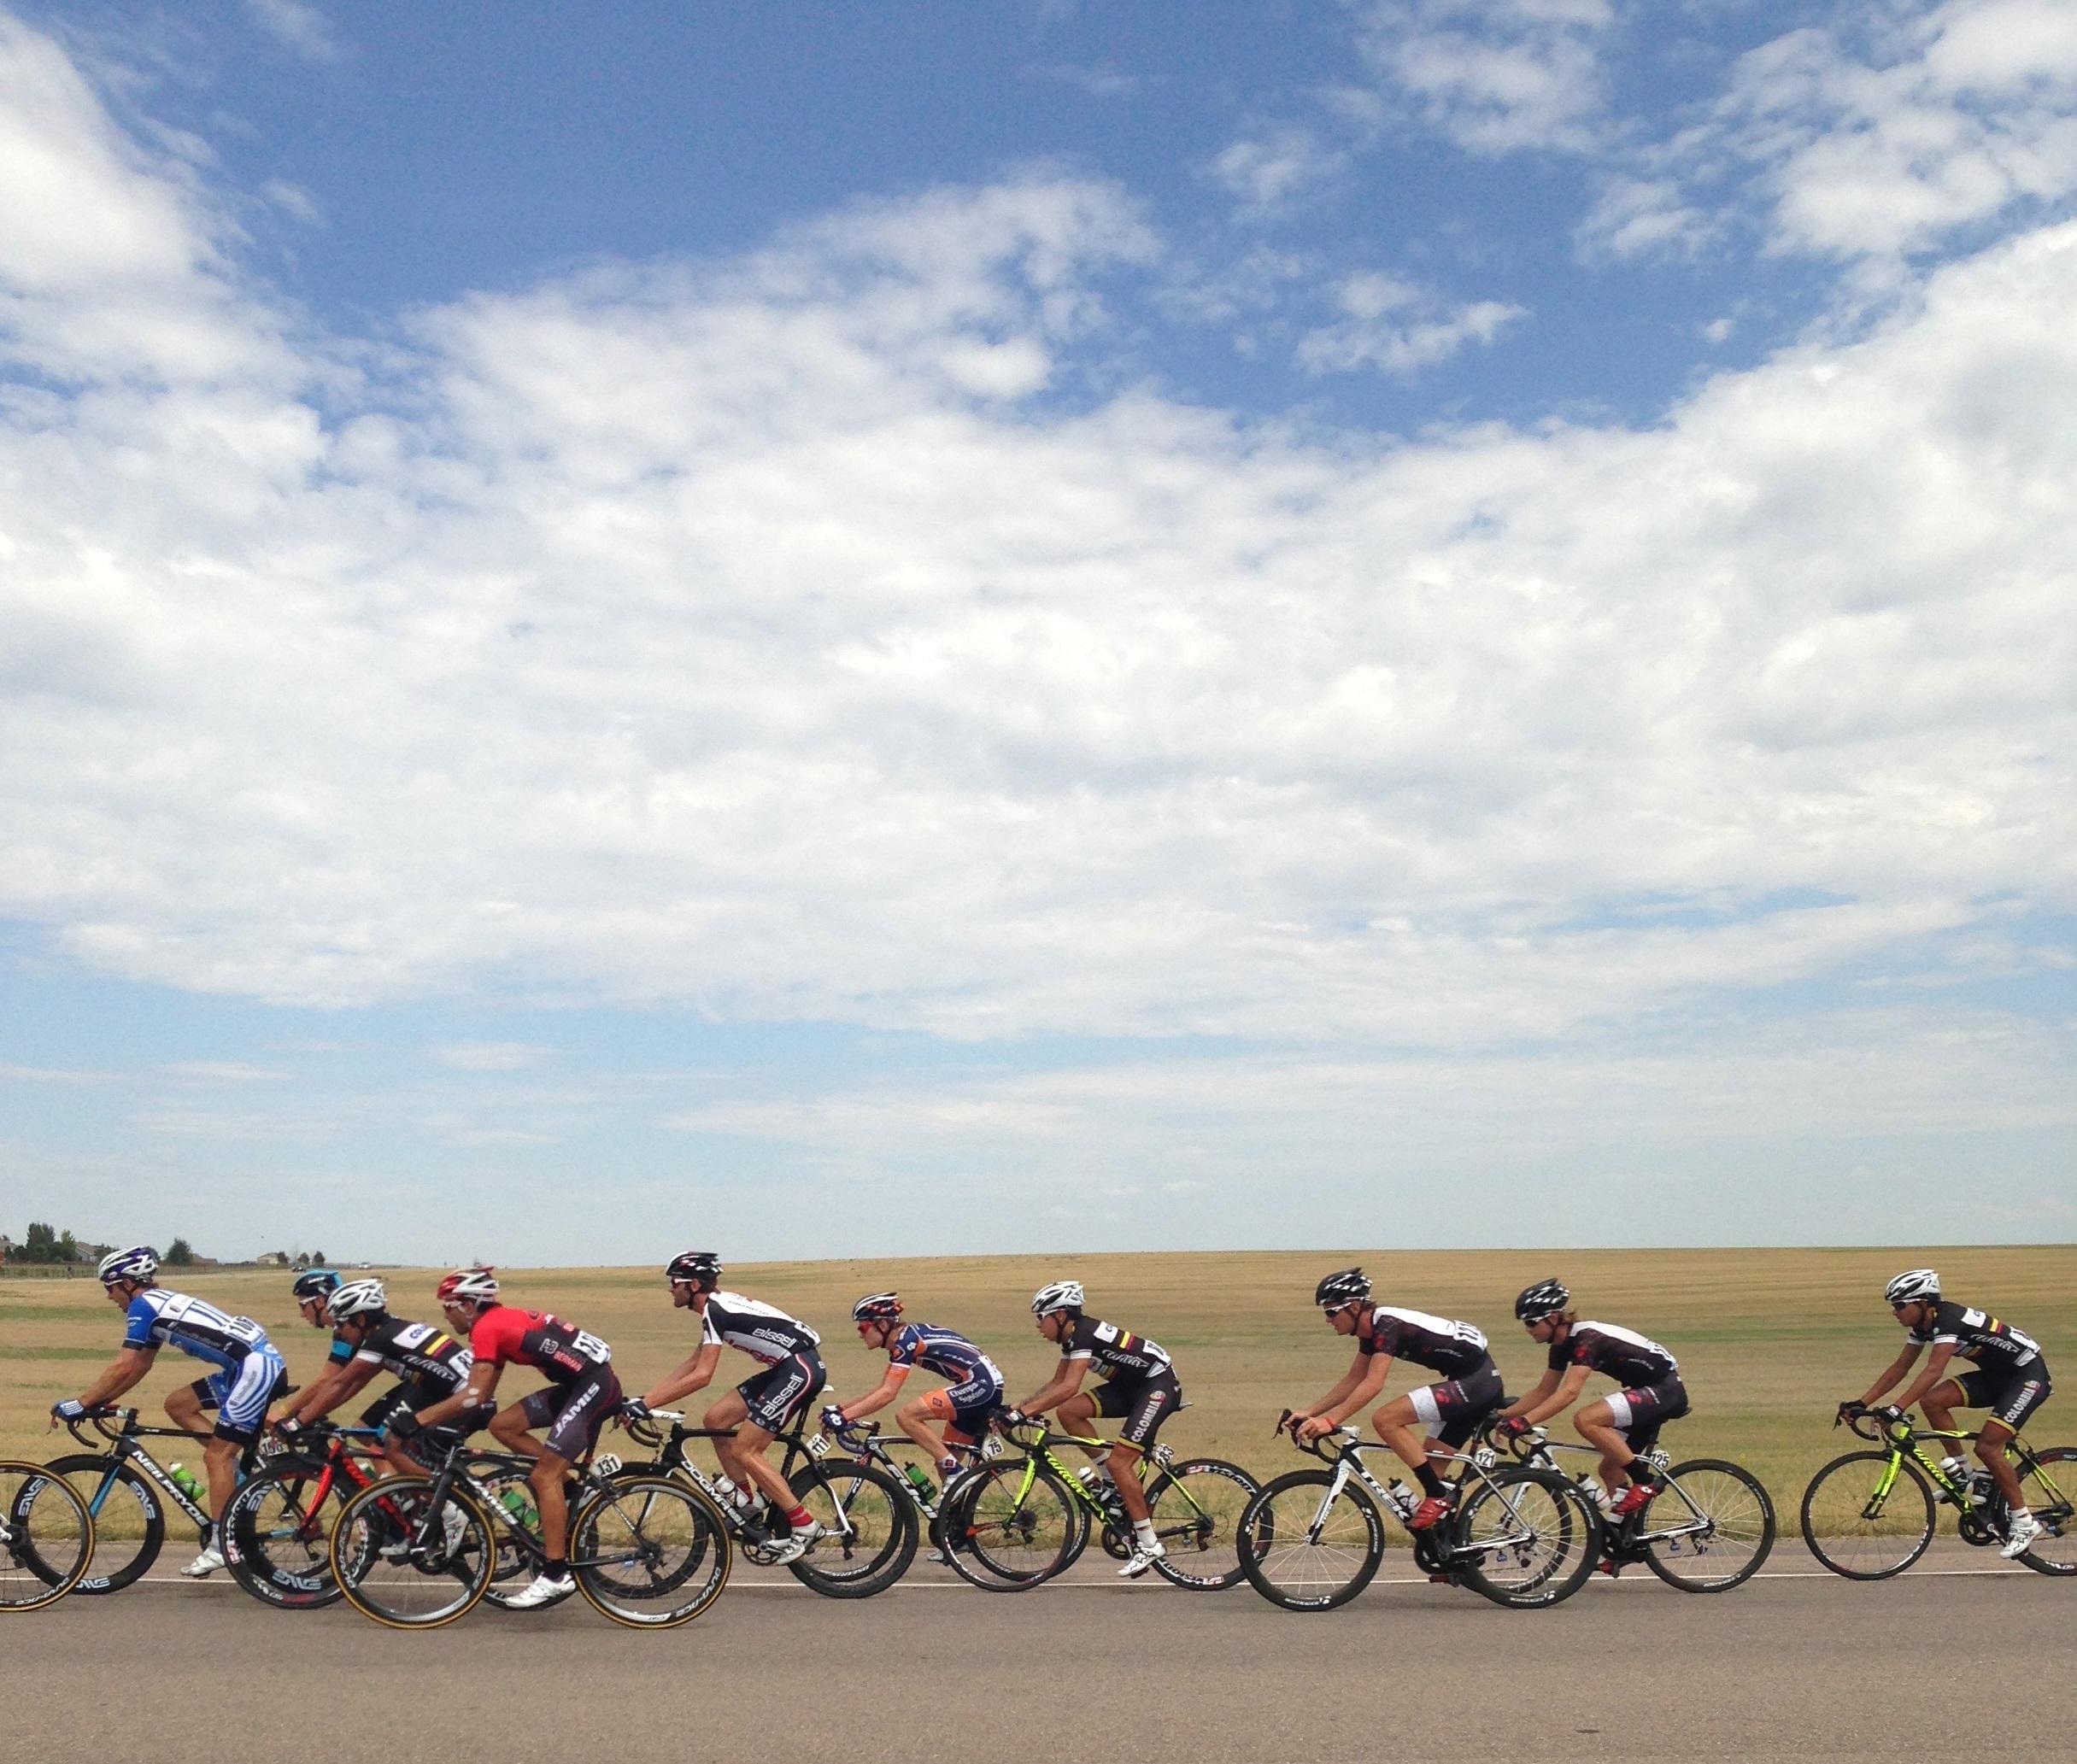 Photo Credit: Chandler Gould
Bikers race through Northern Colorado.